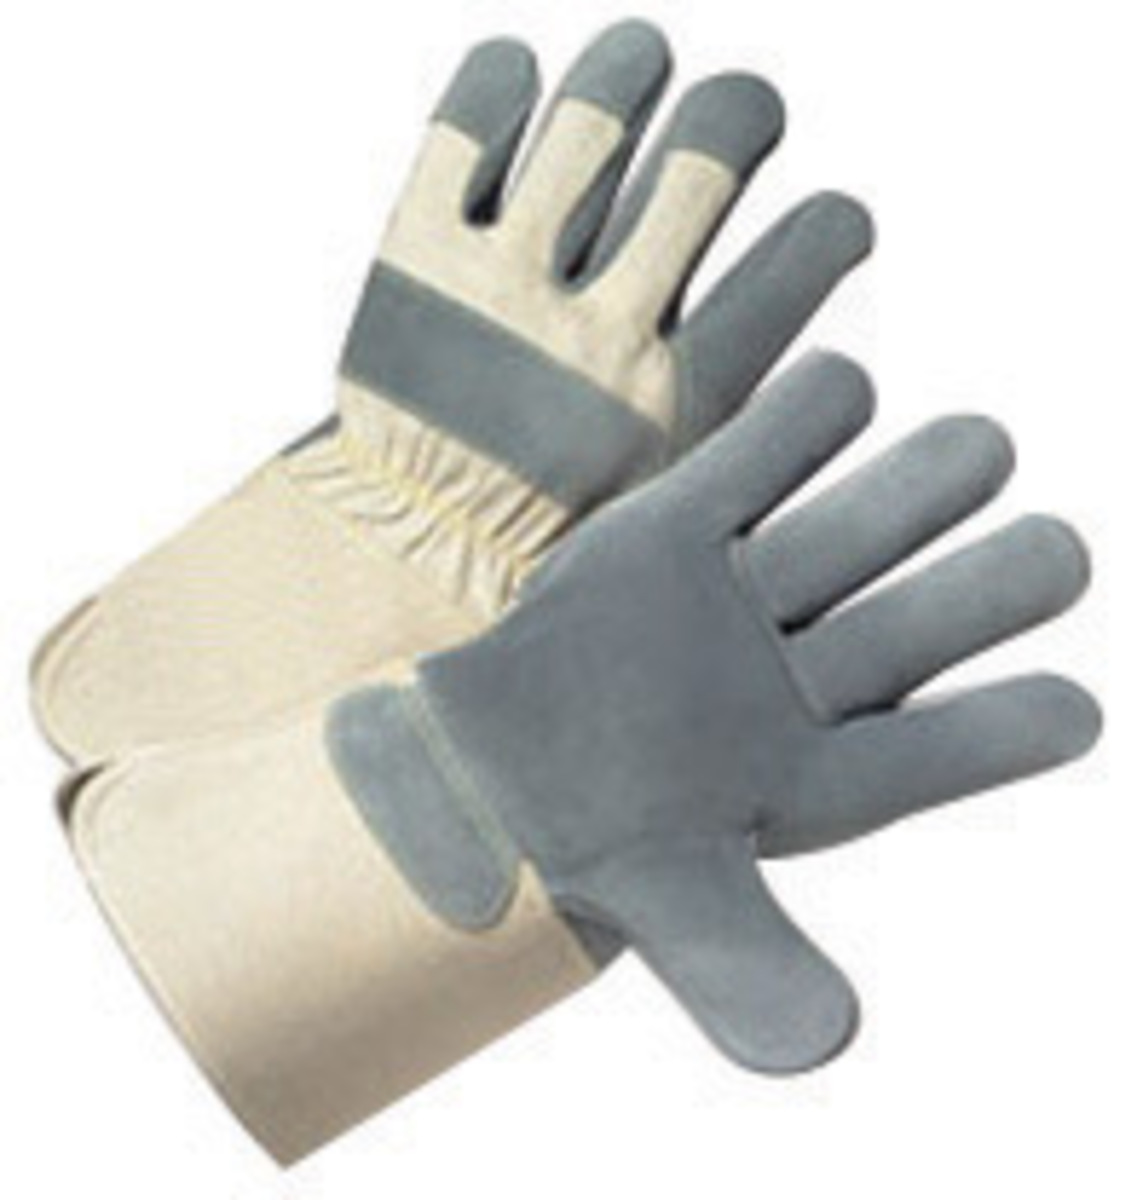 PIP® Large Premium Split Leather Palm Gloves With Canvas Back And Rubberized Gauntlet Cuff